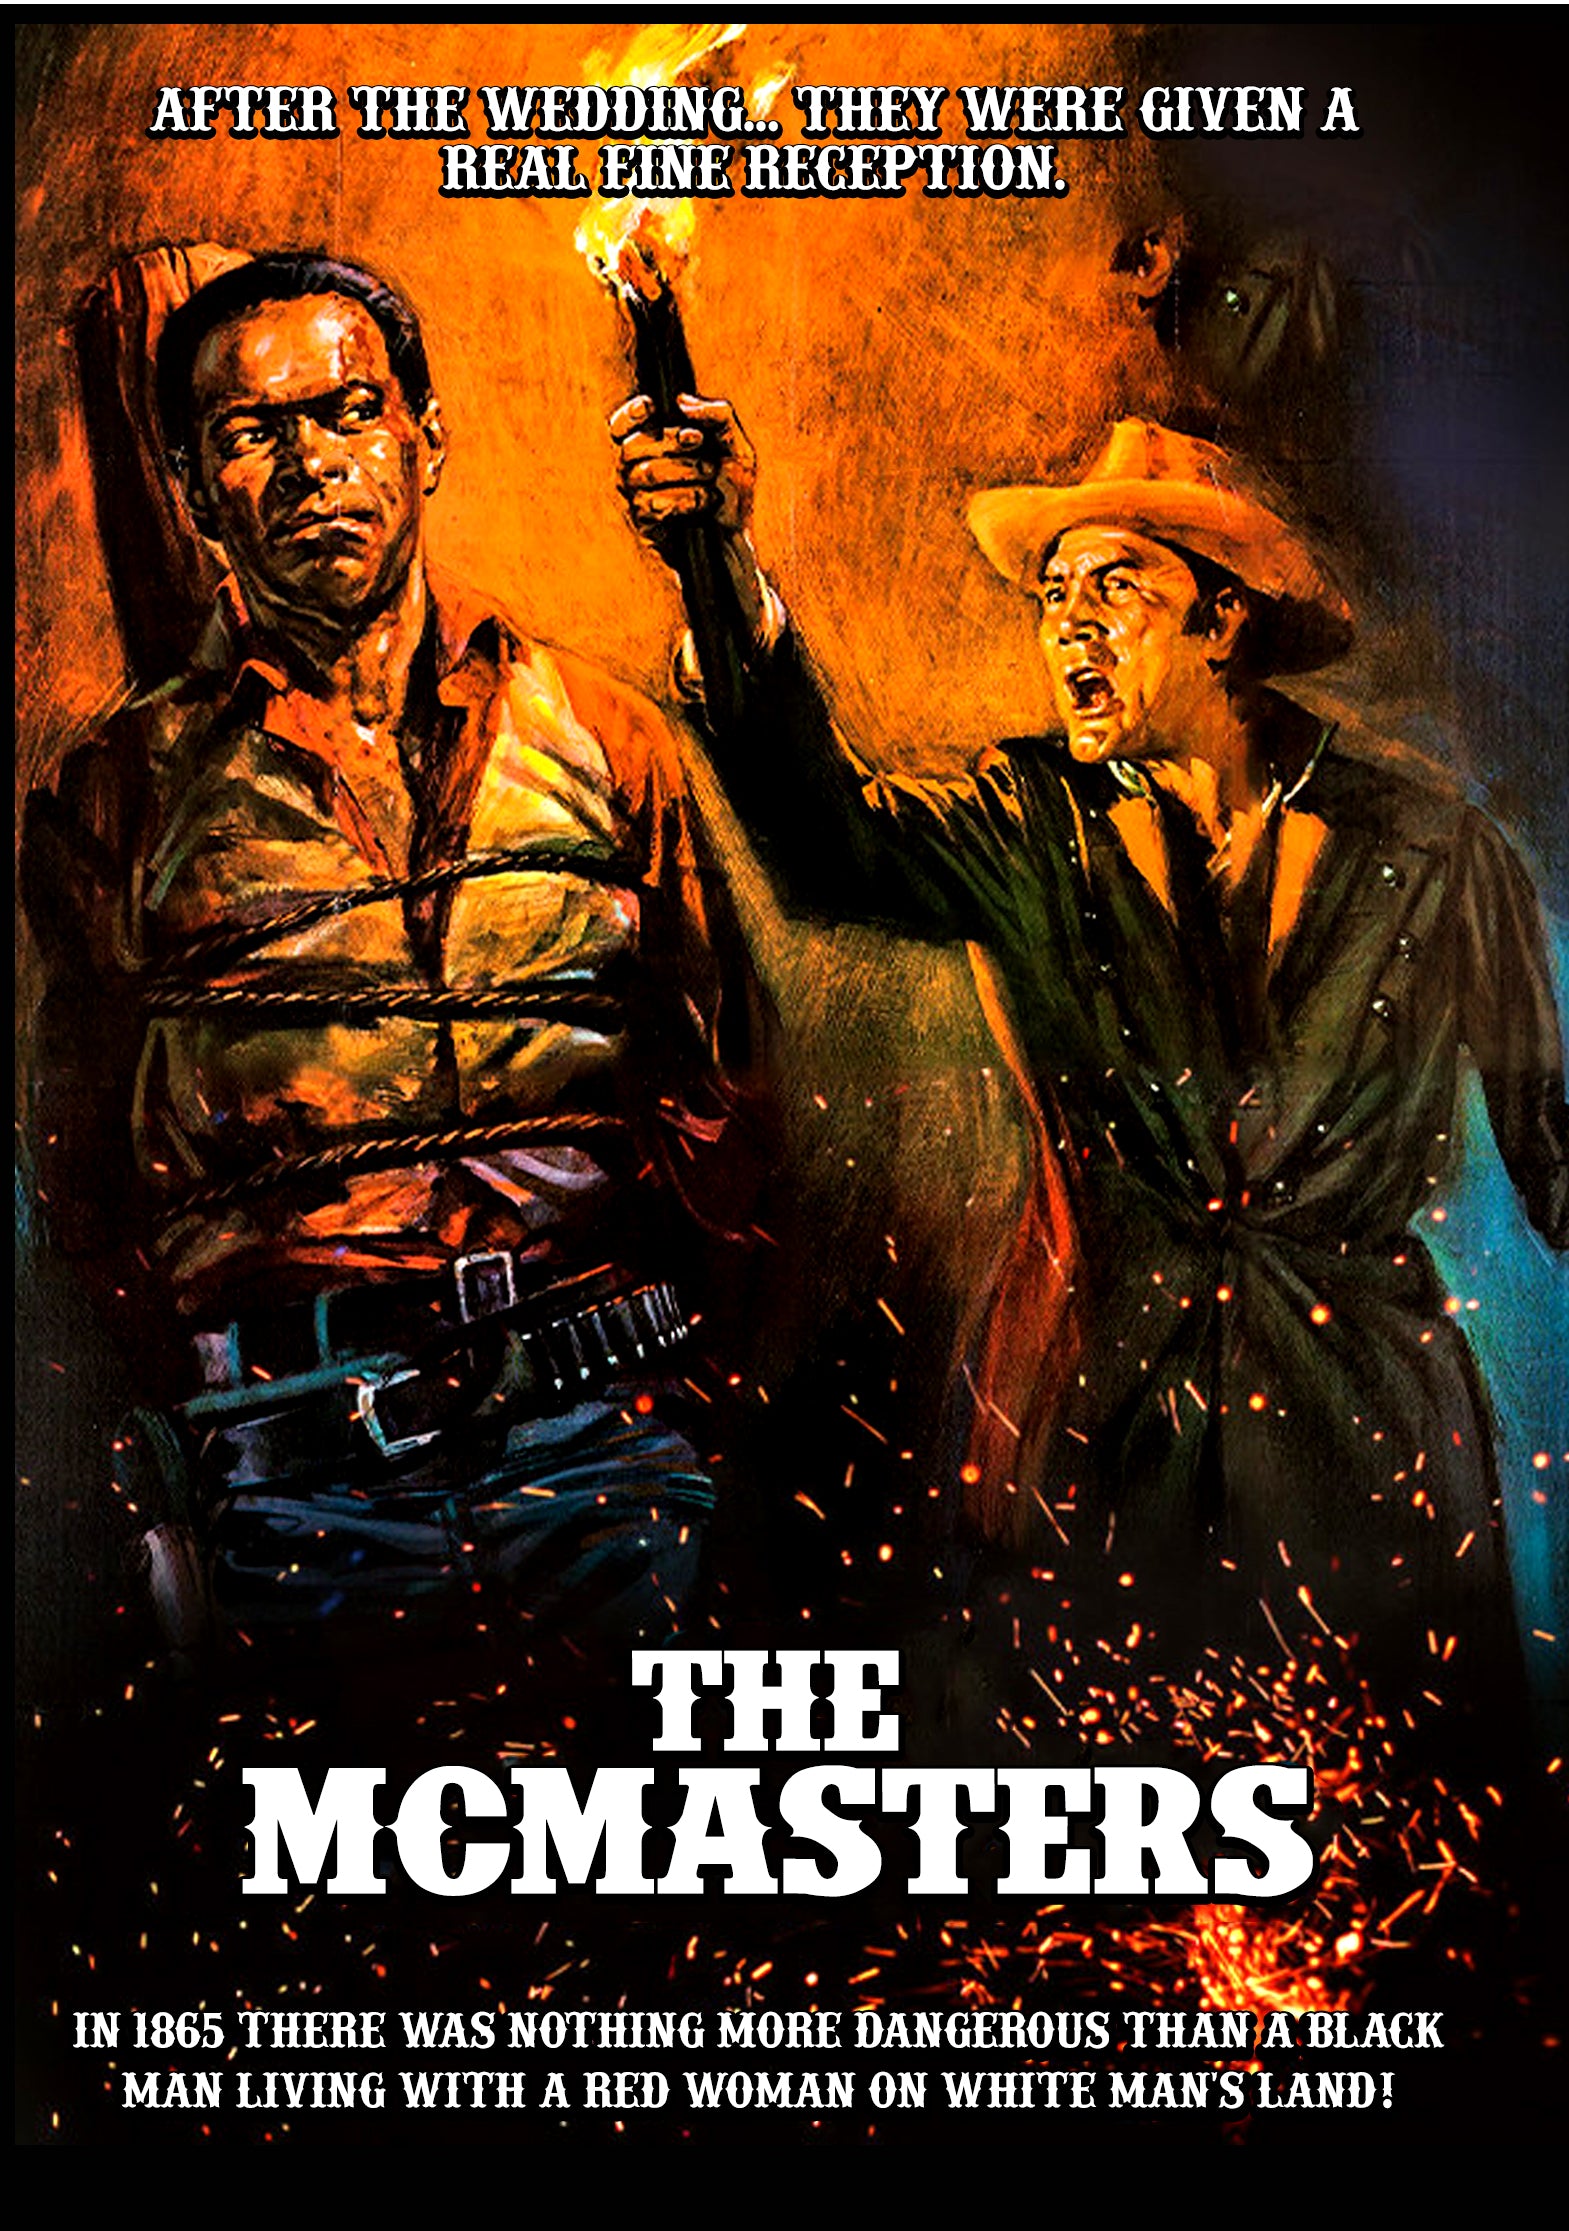 THE MCMASTERS DVD